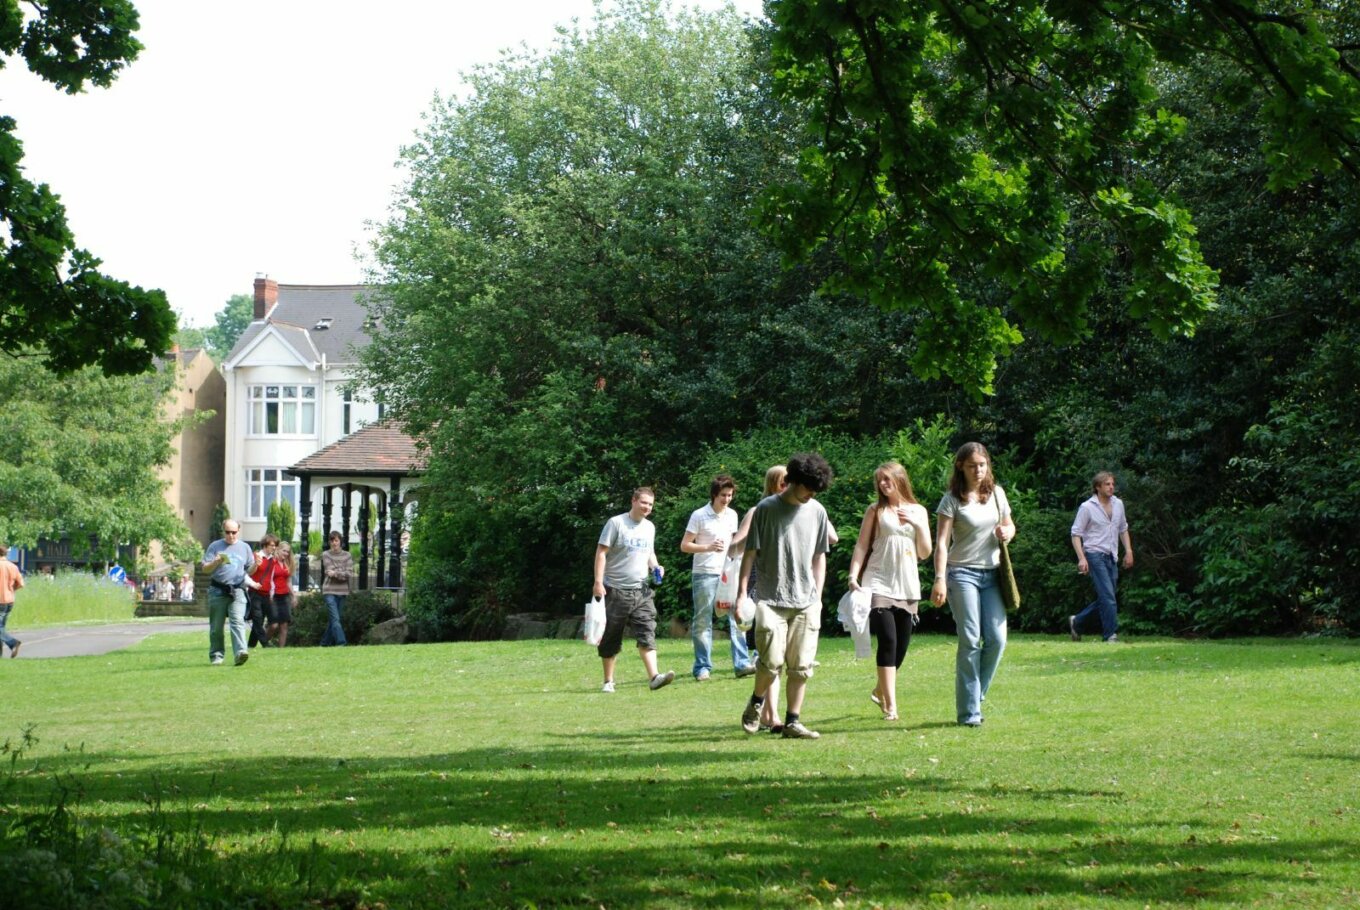 A group of young people walk through a green park, under trees, with a house in the background.